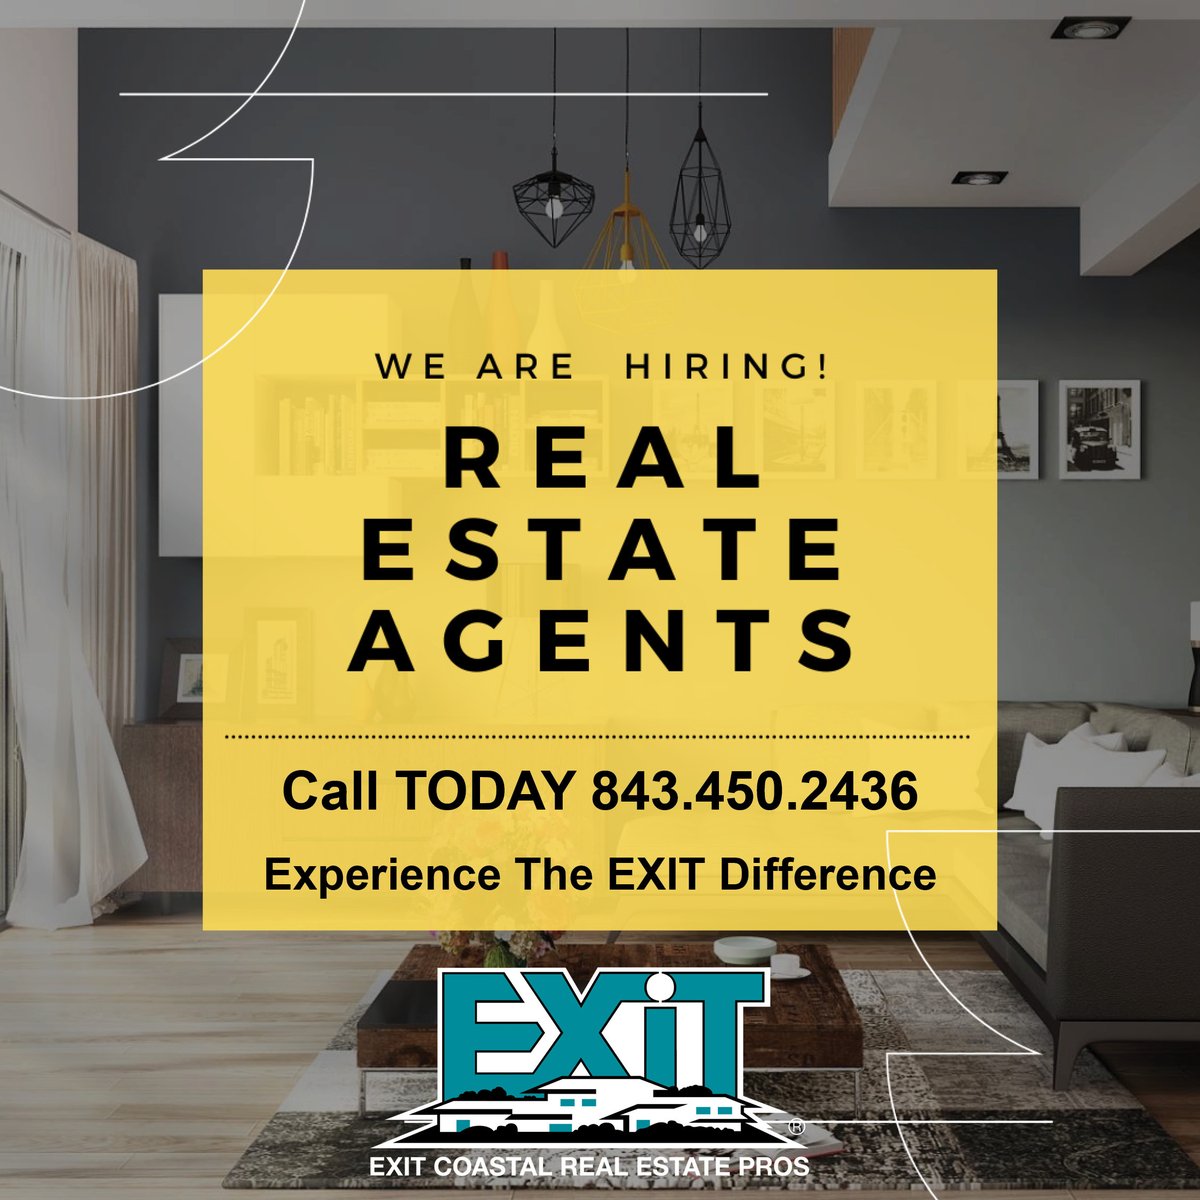 Discover the EXIT Difference with EXIT Coastal Real Estate Pros!
Call us today and see how we can elevate your career.

#EXITCoastalRealEstatePros #EXITRealEstate #SCHomes #RealEstate #SoldWithStyle #HomeBuyingMadeEasy #EXITRealty #EXITCRP #MyrtleBeachRealEstate...